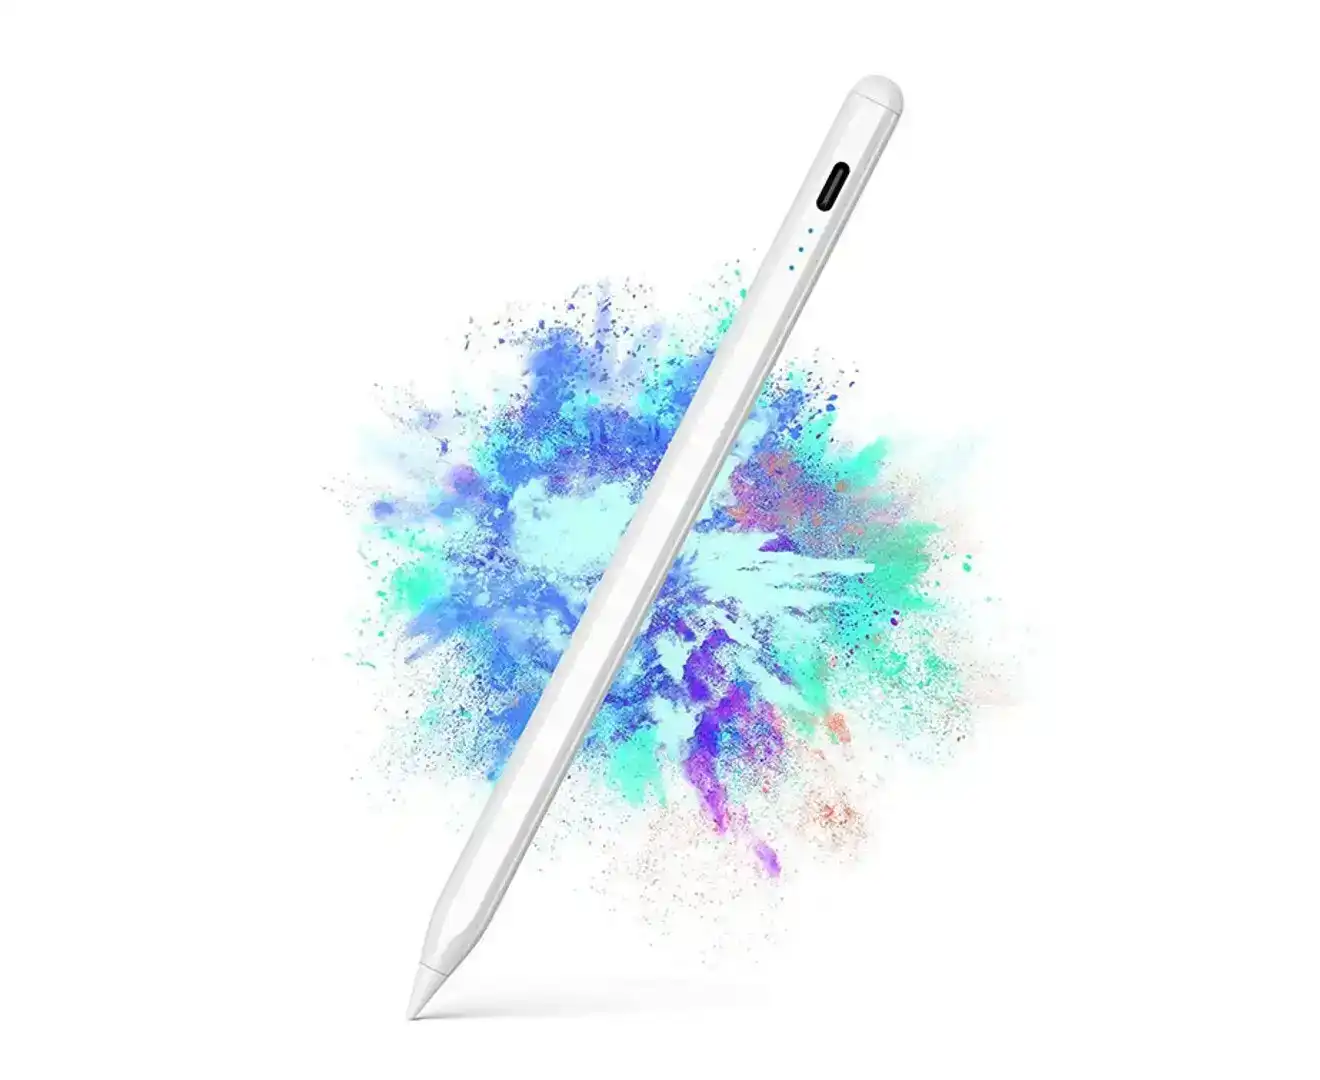 Orotec Magnetic Stylus Pen with Tilt Sensitivity & Battery Status Indicator for Apple iPad 2018 Model and Later, White